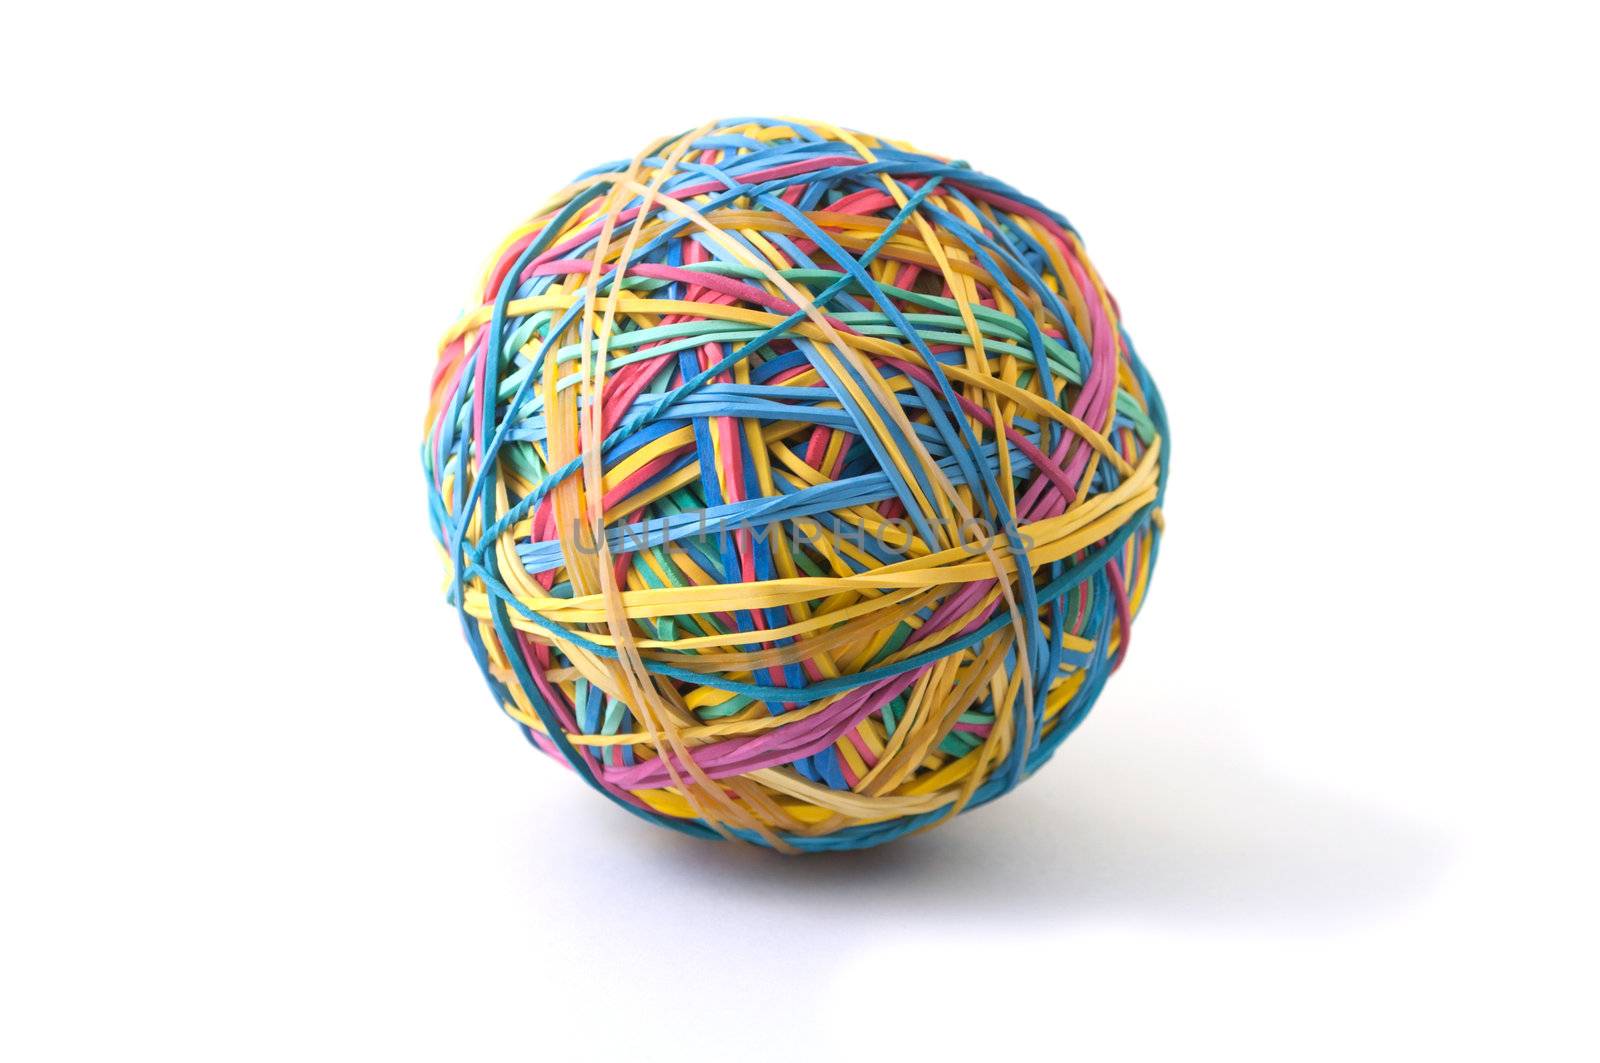 Isolated rubber band ball by catalinr